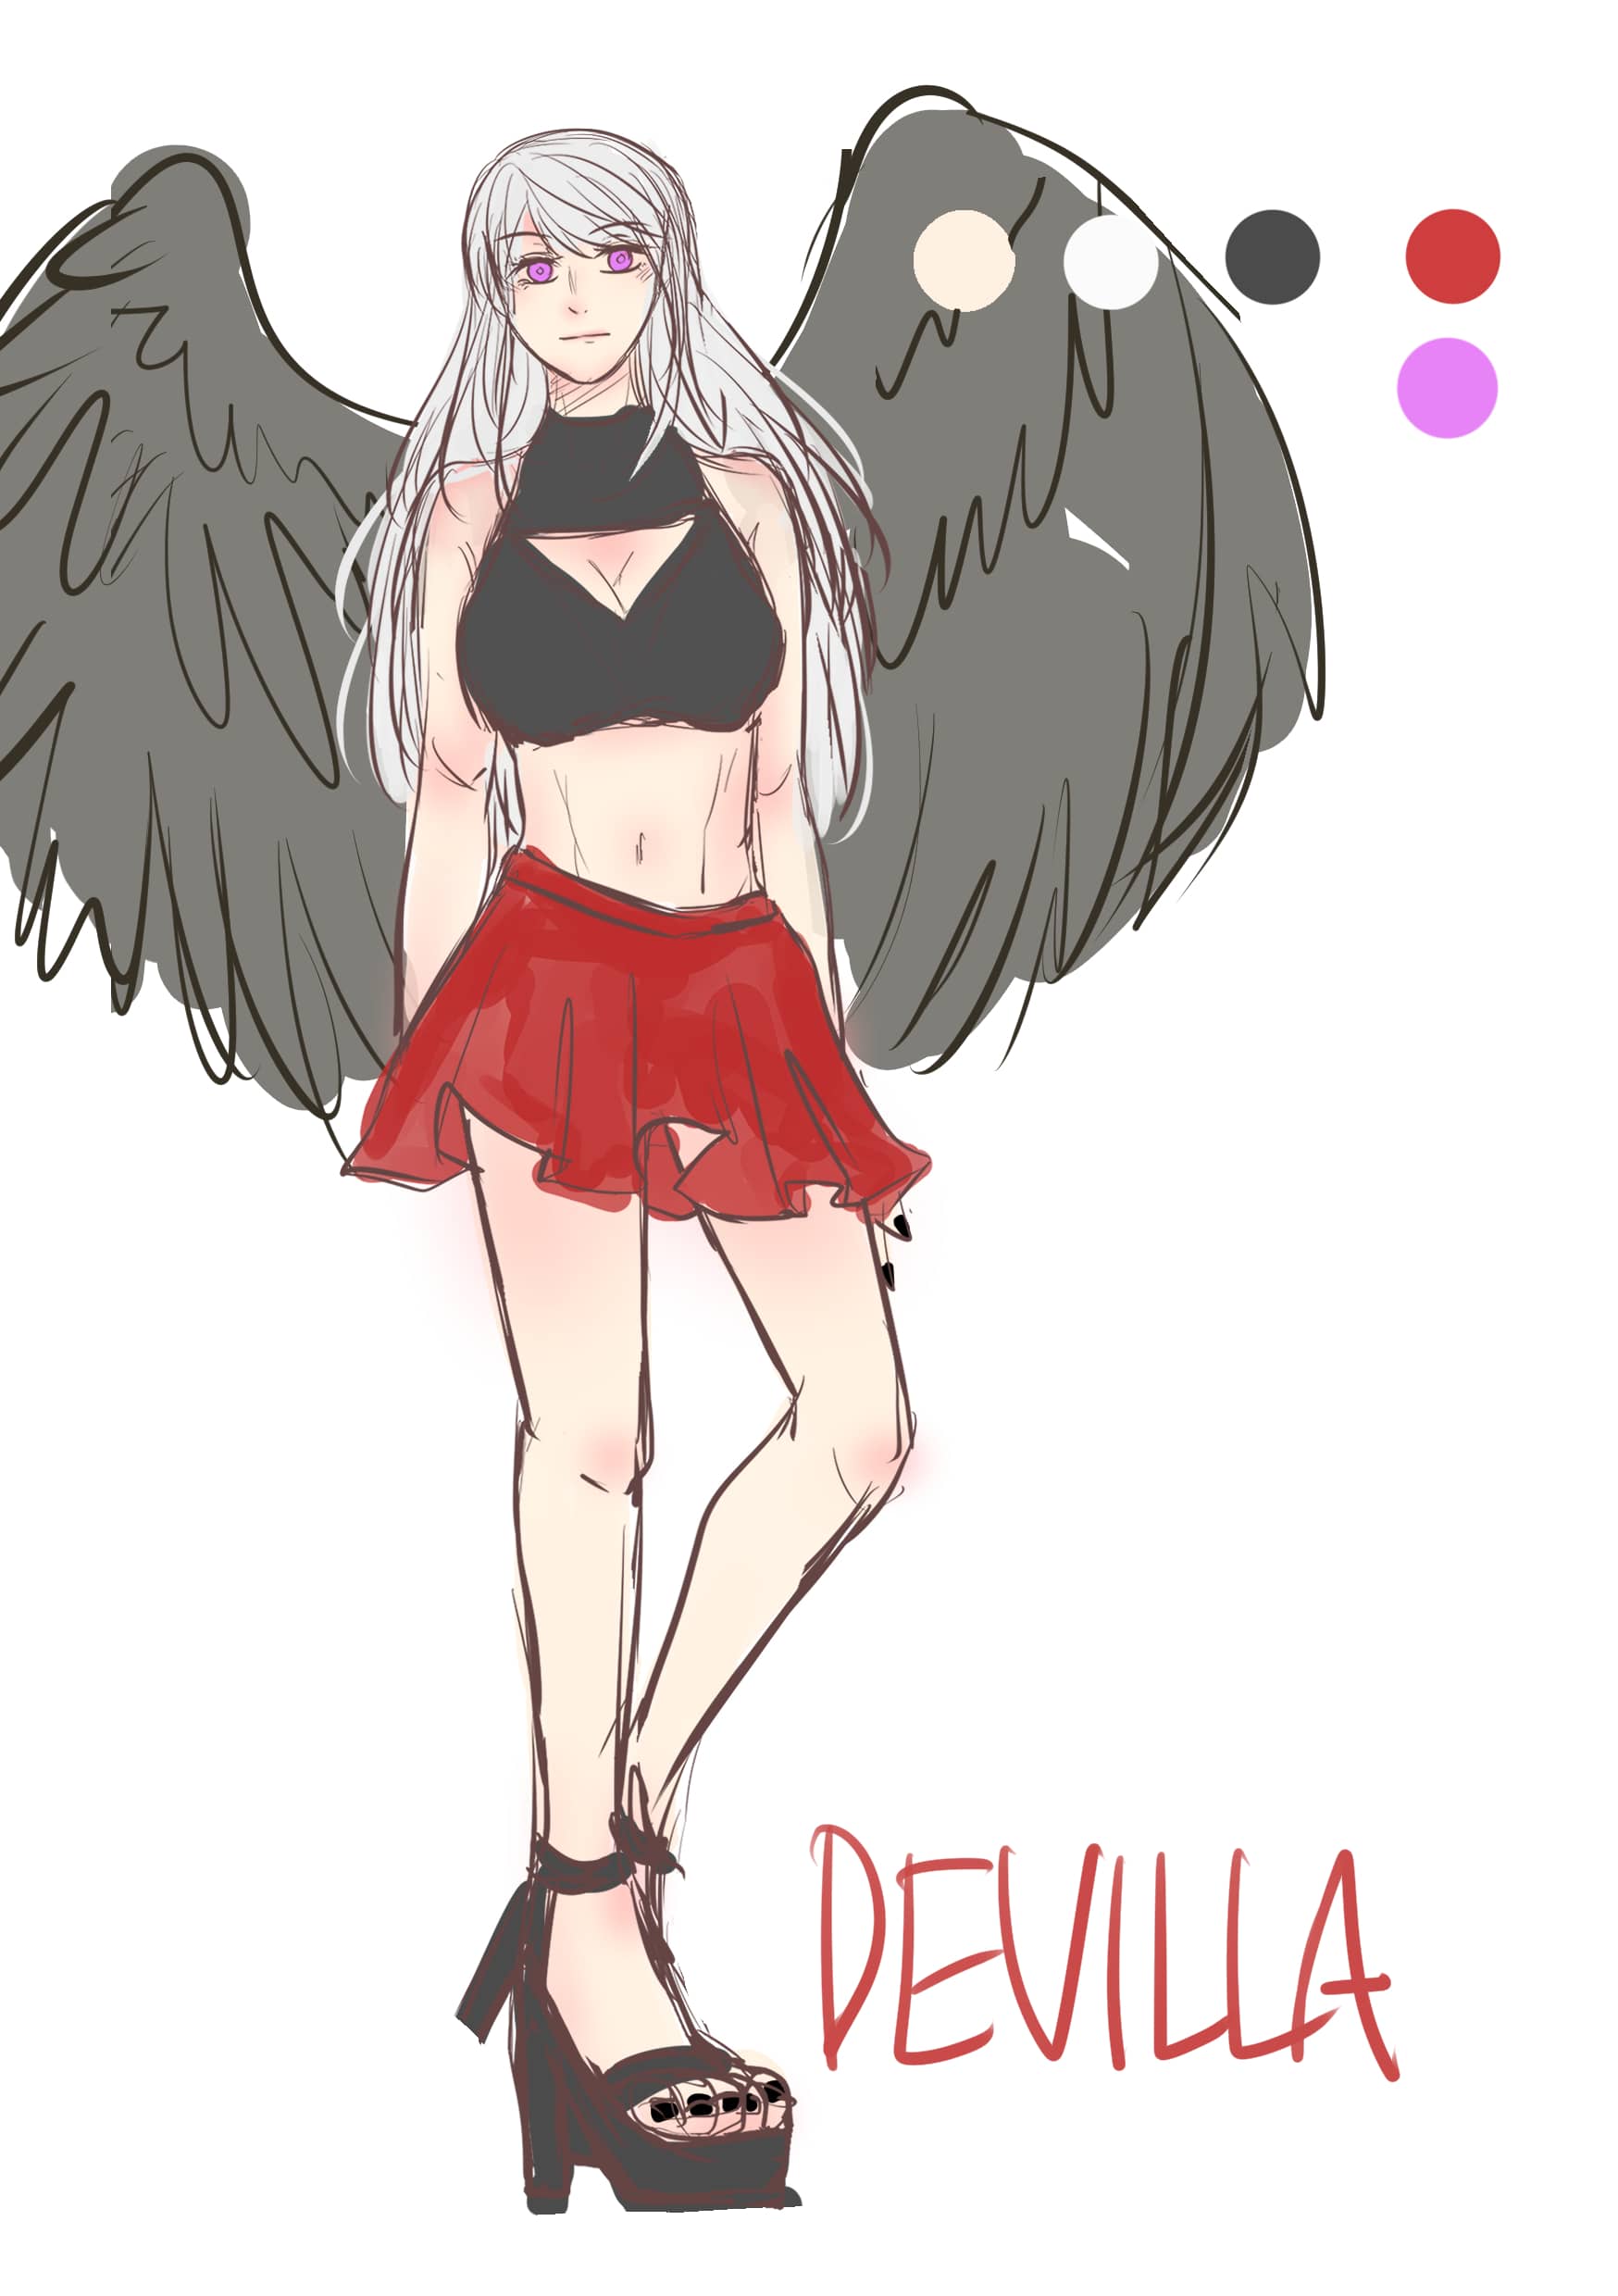 Reference pic of Devilla - art by @HaizeUqei on Twitter